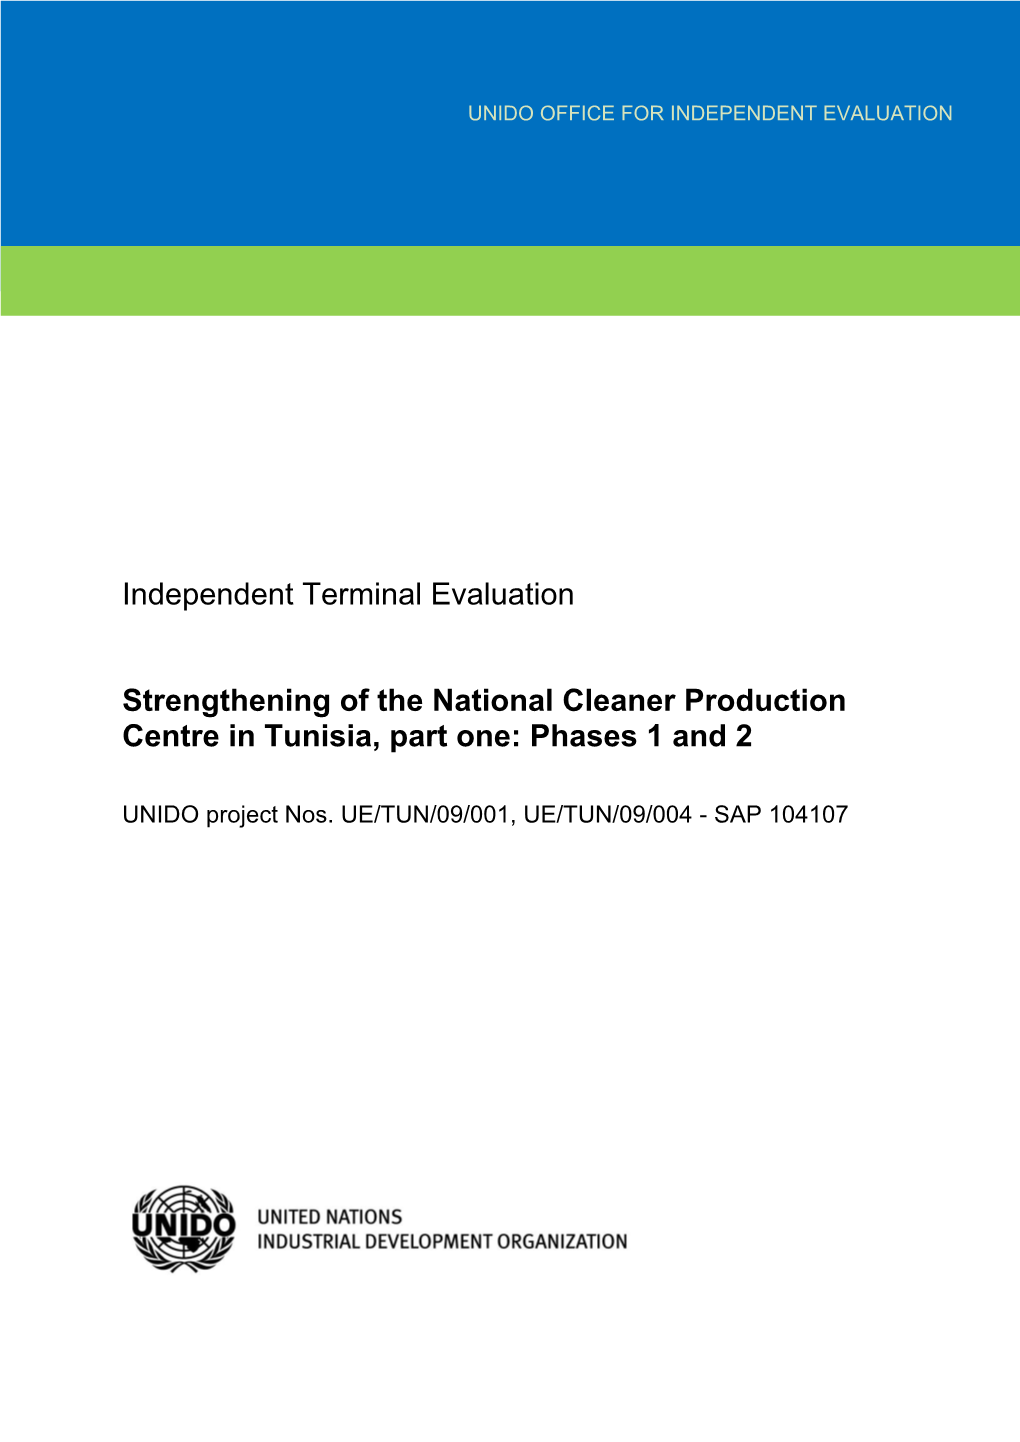 Independent Terminal Evaluation Strengthening of the National Cleaner Production Centre in Tunisia, Part One: Phases 1 and 2